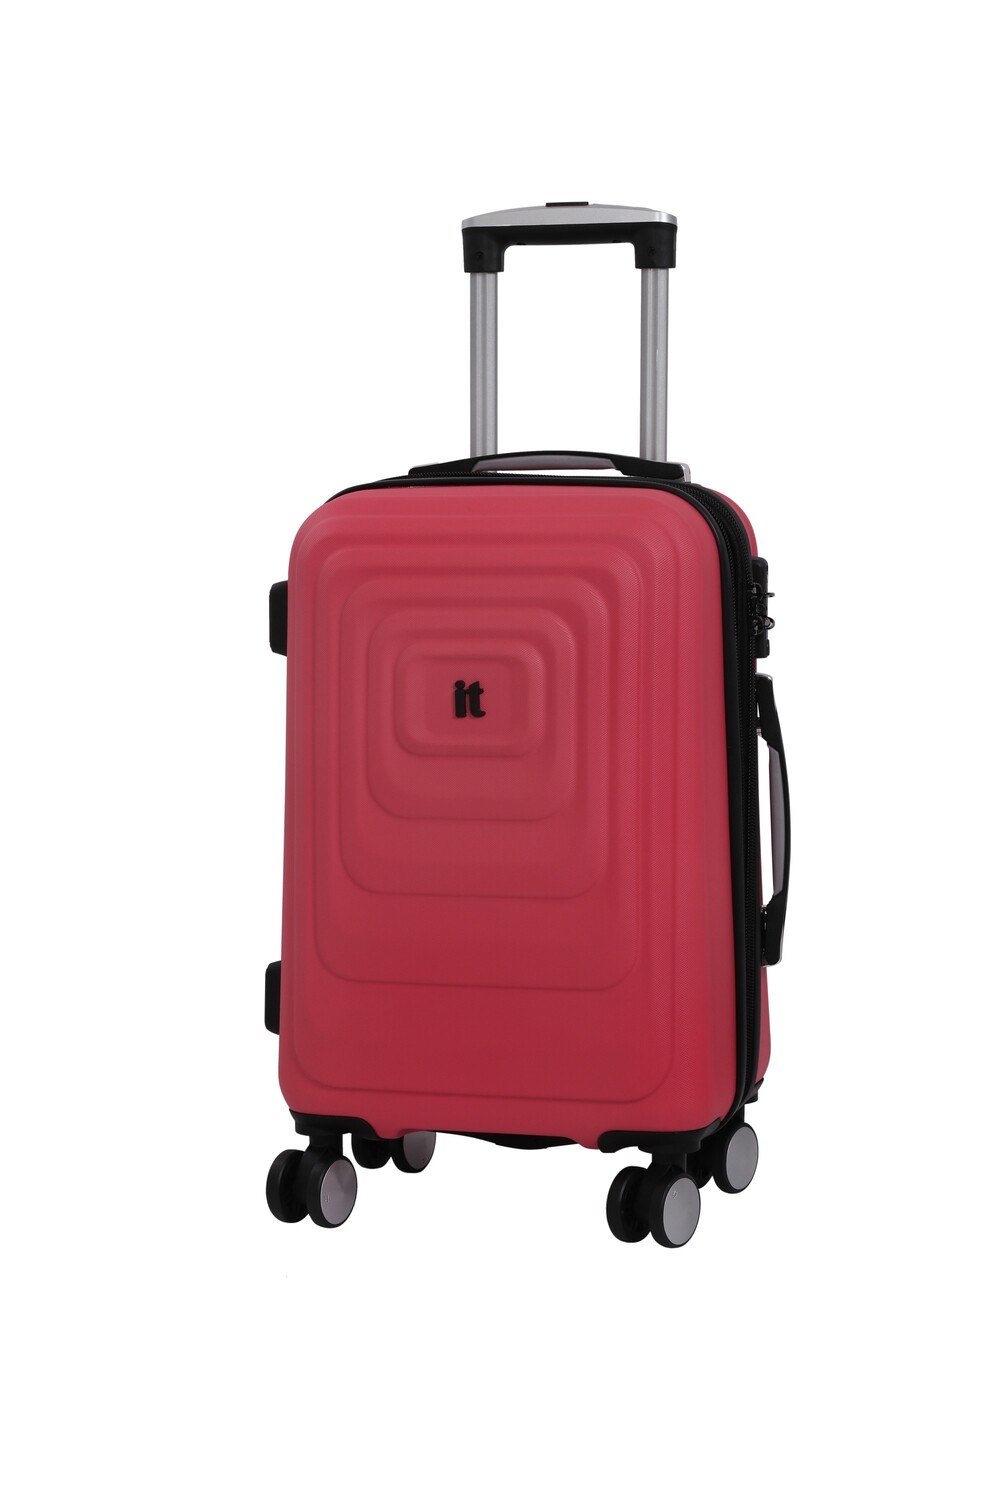 IT LUGGAGE MESMERIZE 21" STRONG TROLLEY CAYENNE